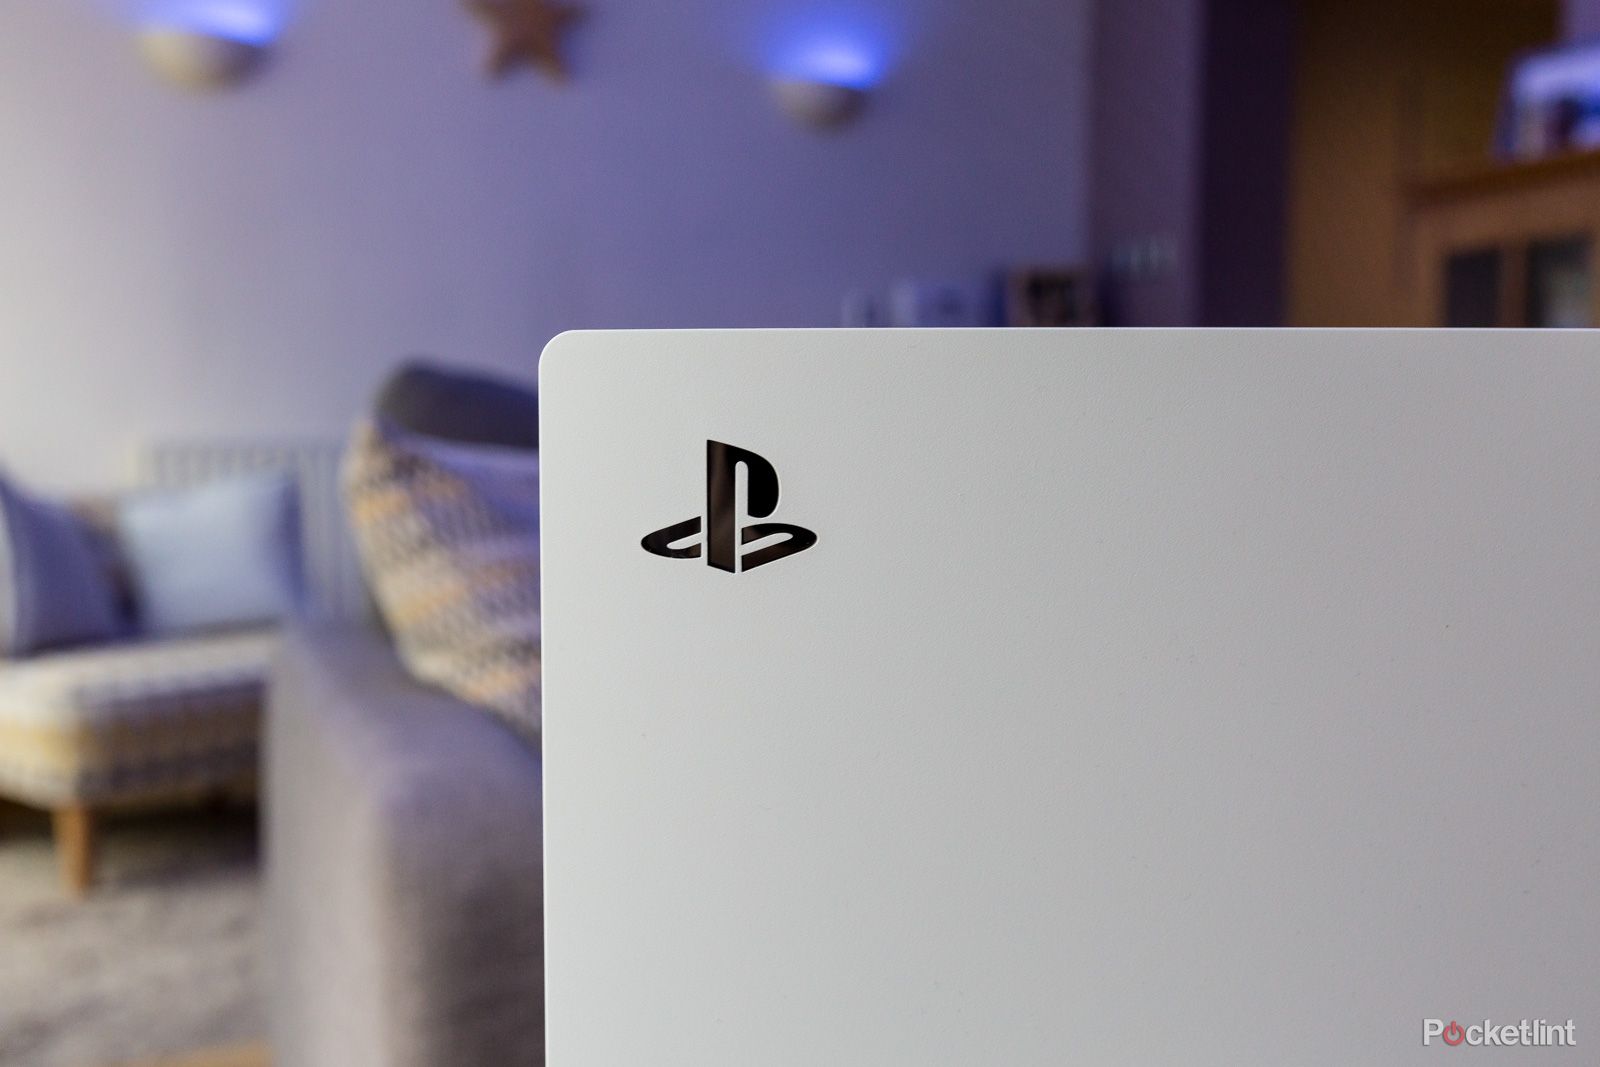 How to change your PSN ID on PS4 and when will Sony let you change your  account name?